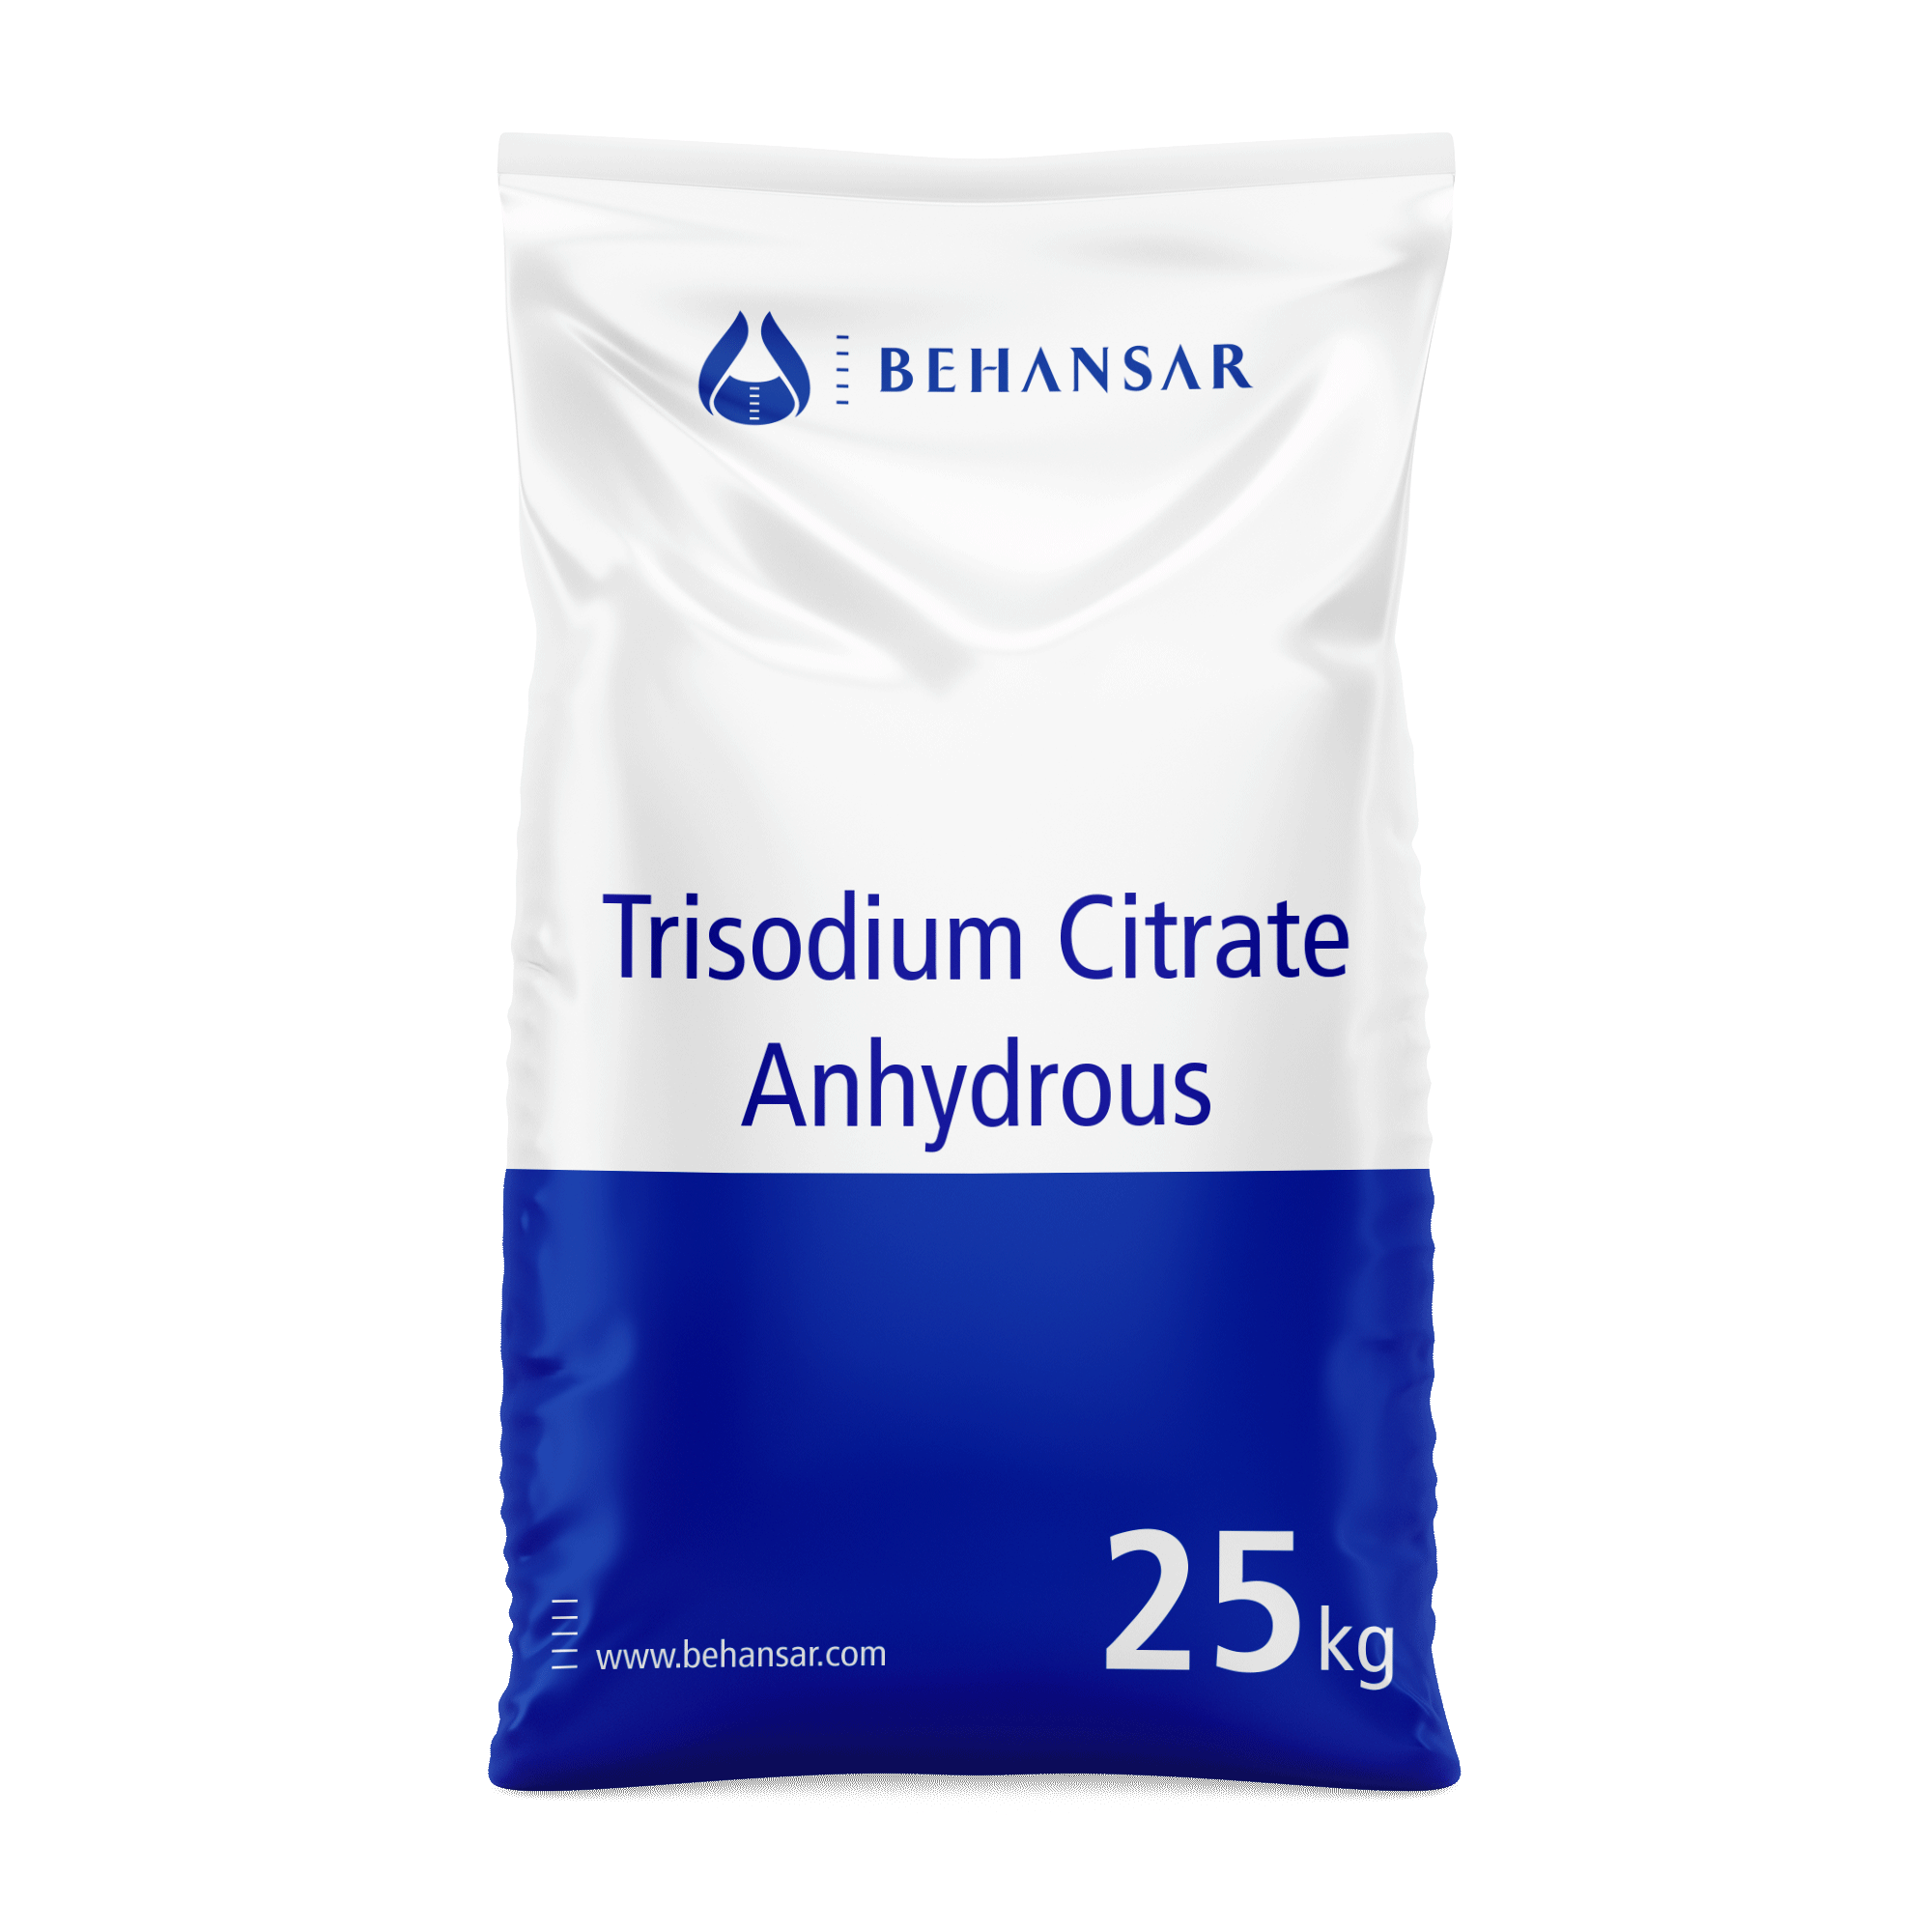 Trisodium Citrate Anhydrous is one of the products of Behansar Co